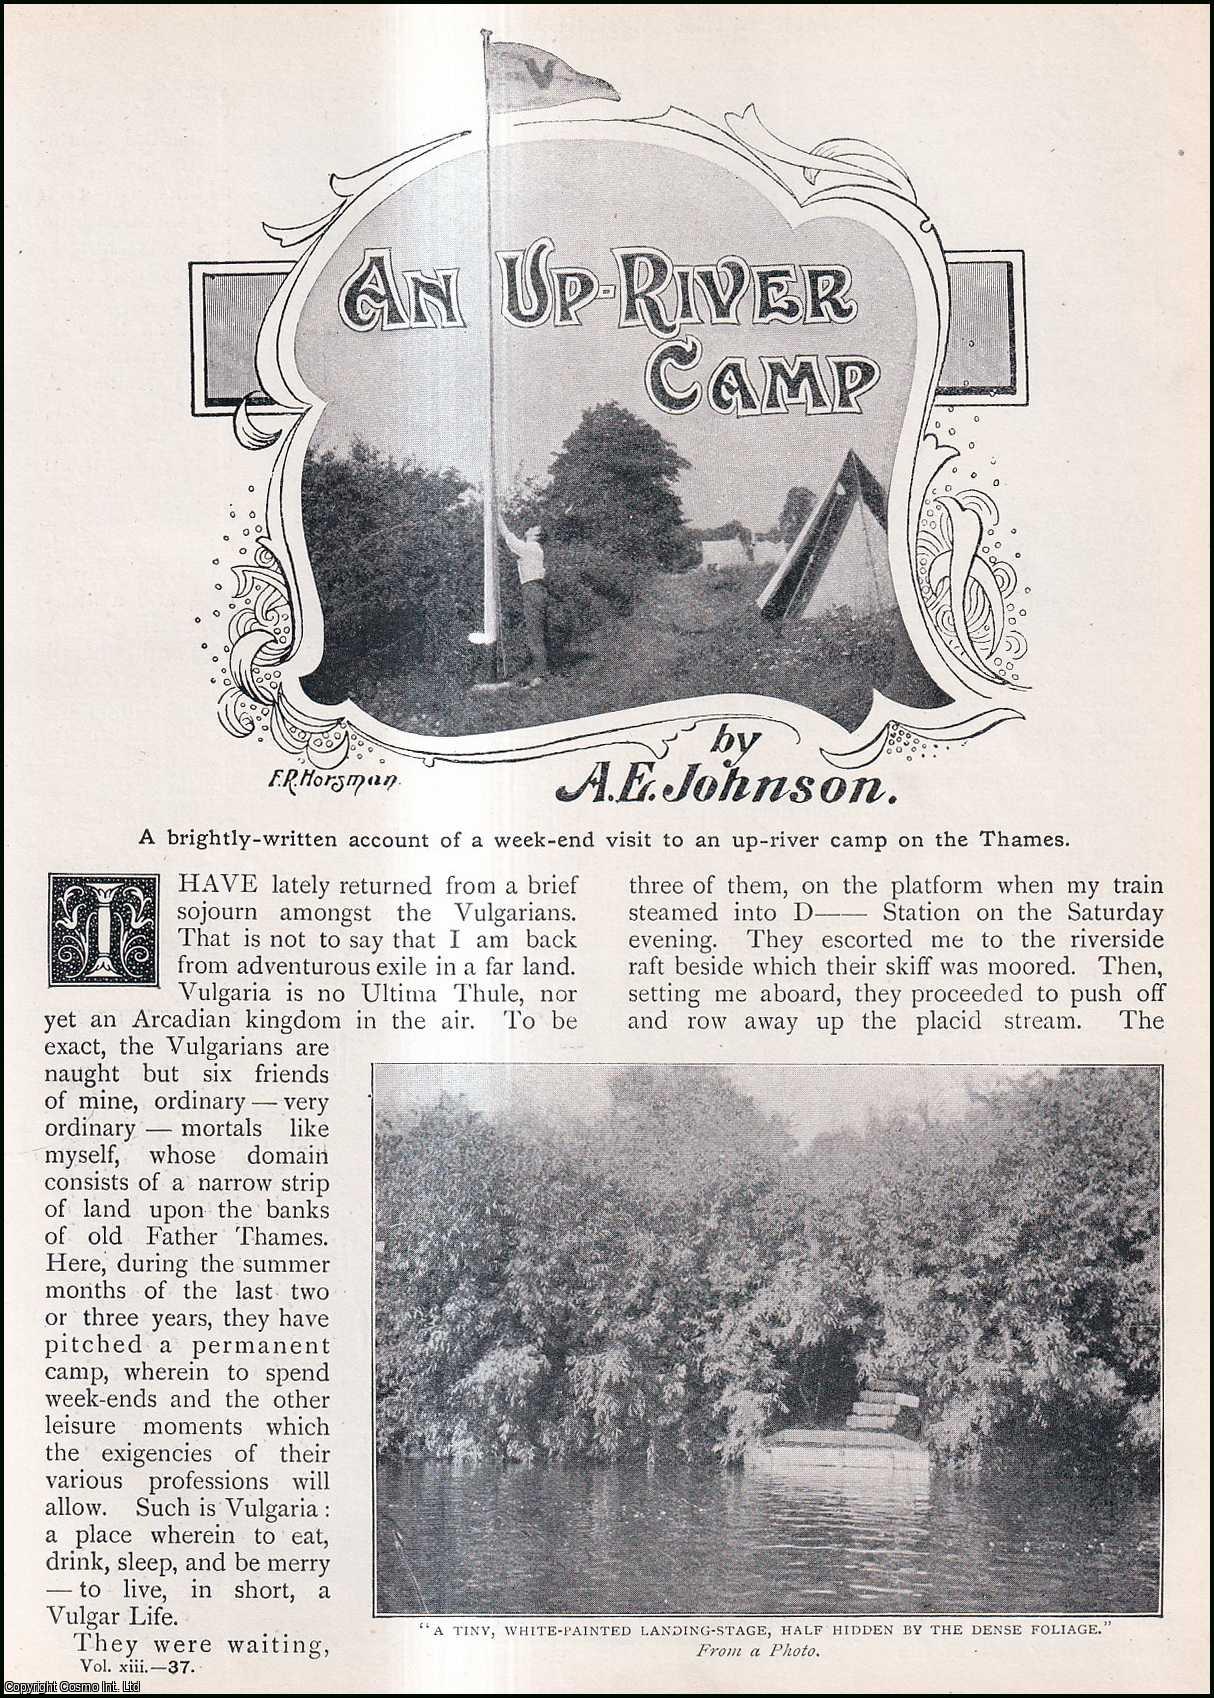 A.E. Johnson - An Up River Camp : a weekend visit to a Camp on the Thames. An uncommon original article from the Wide World Magazine, 1904.